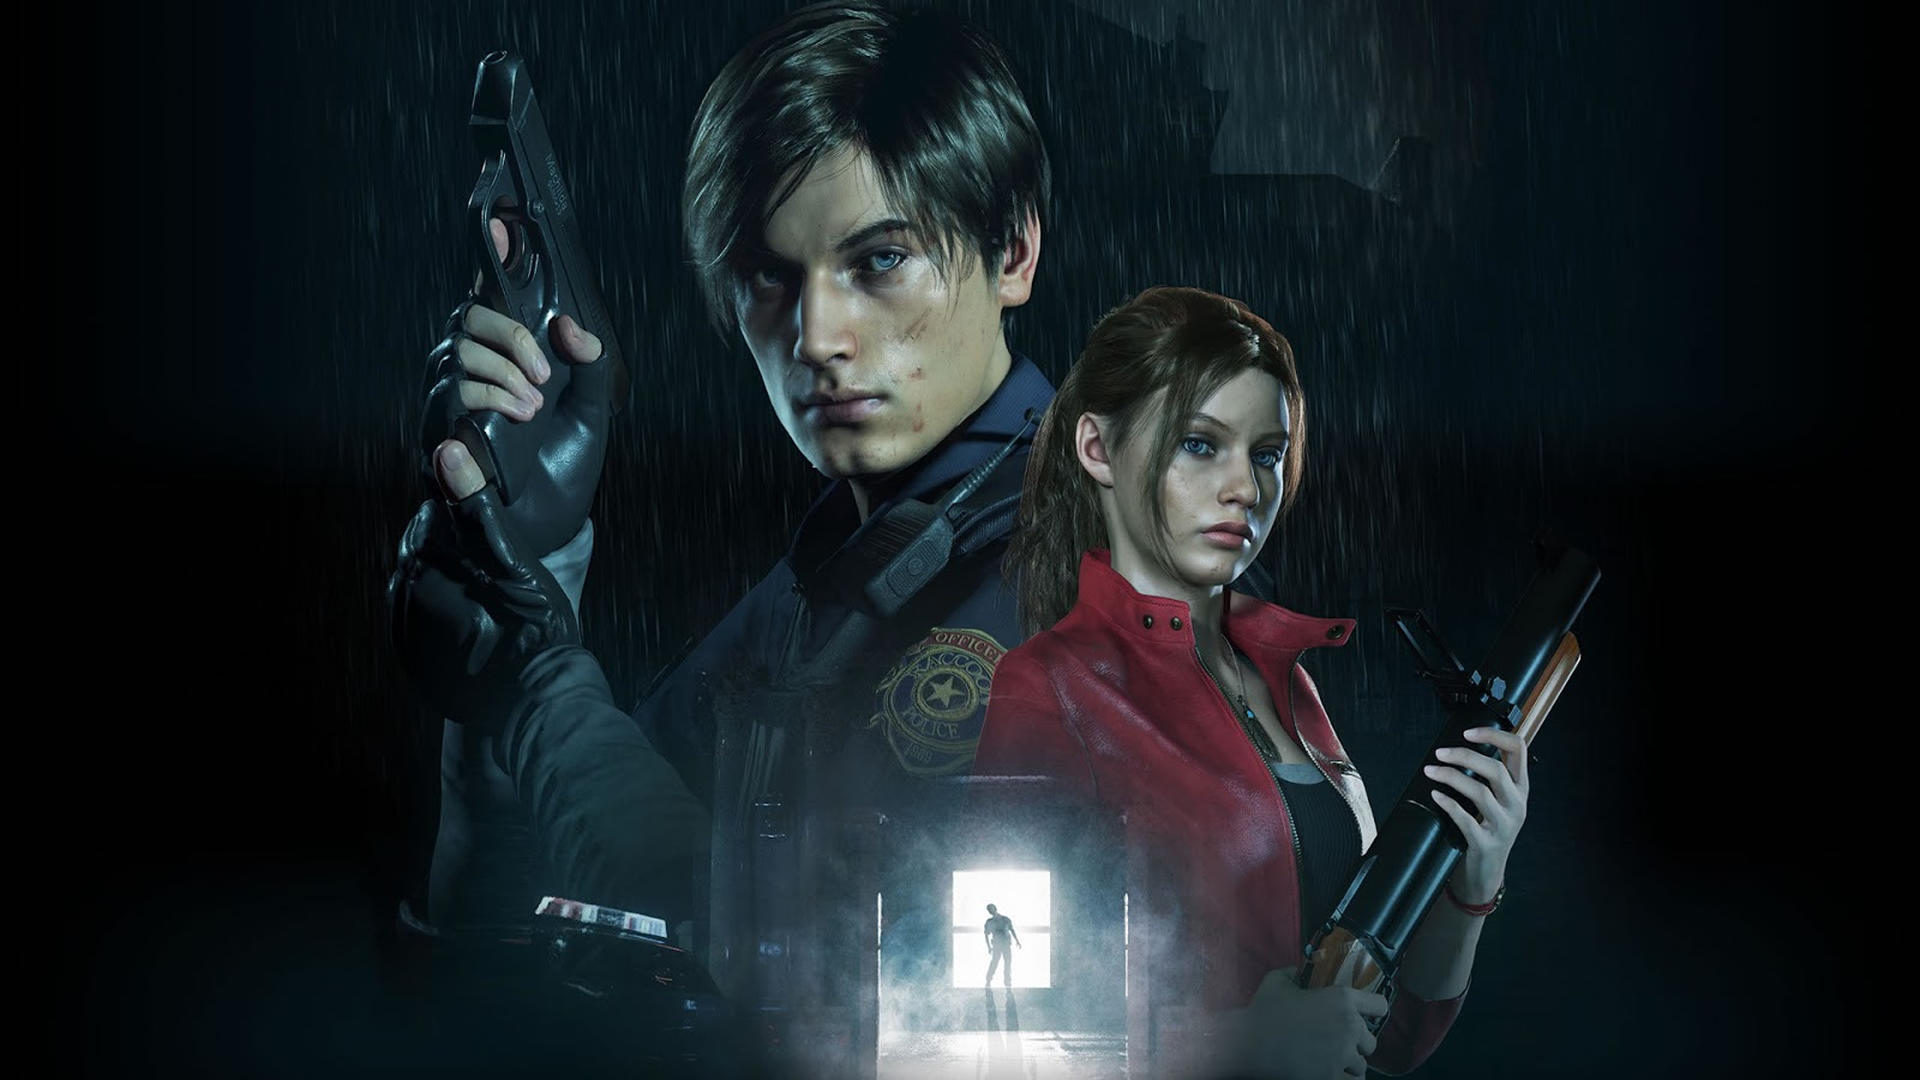 General 1920x1080 Resident Evil 2 video games Claire Redfield Leon Kennedy Capcom Racoon City Resident Evil video game characters